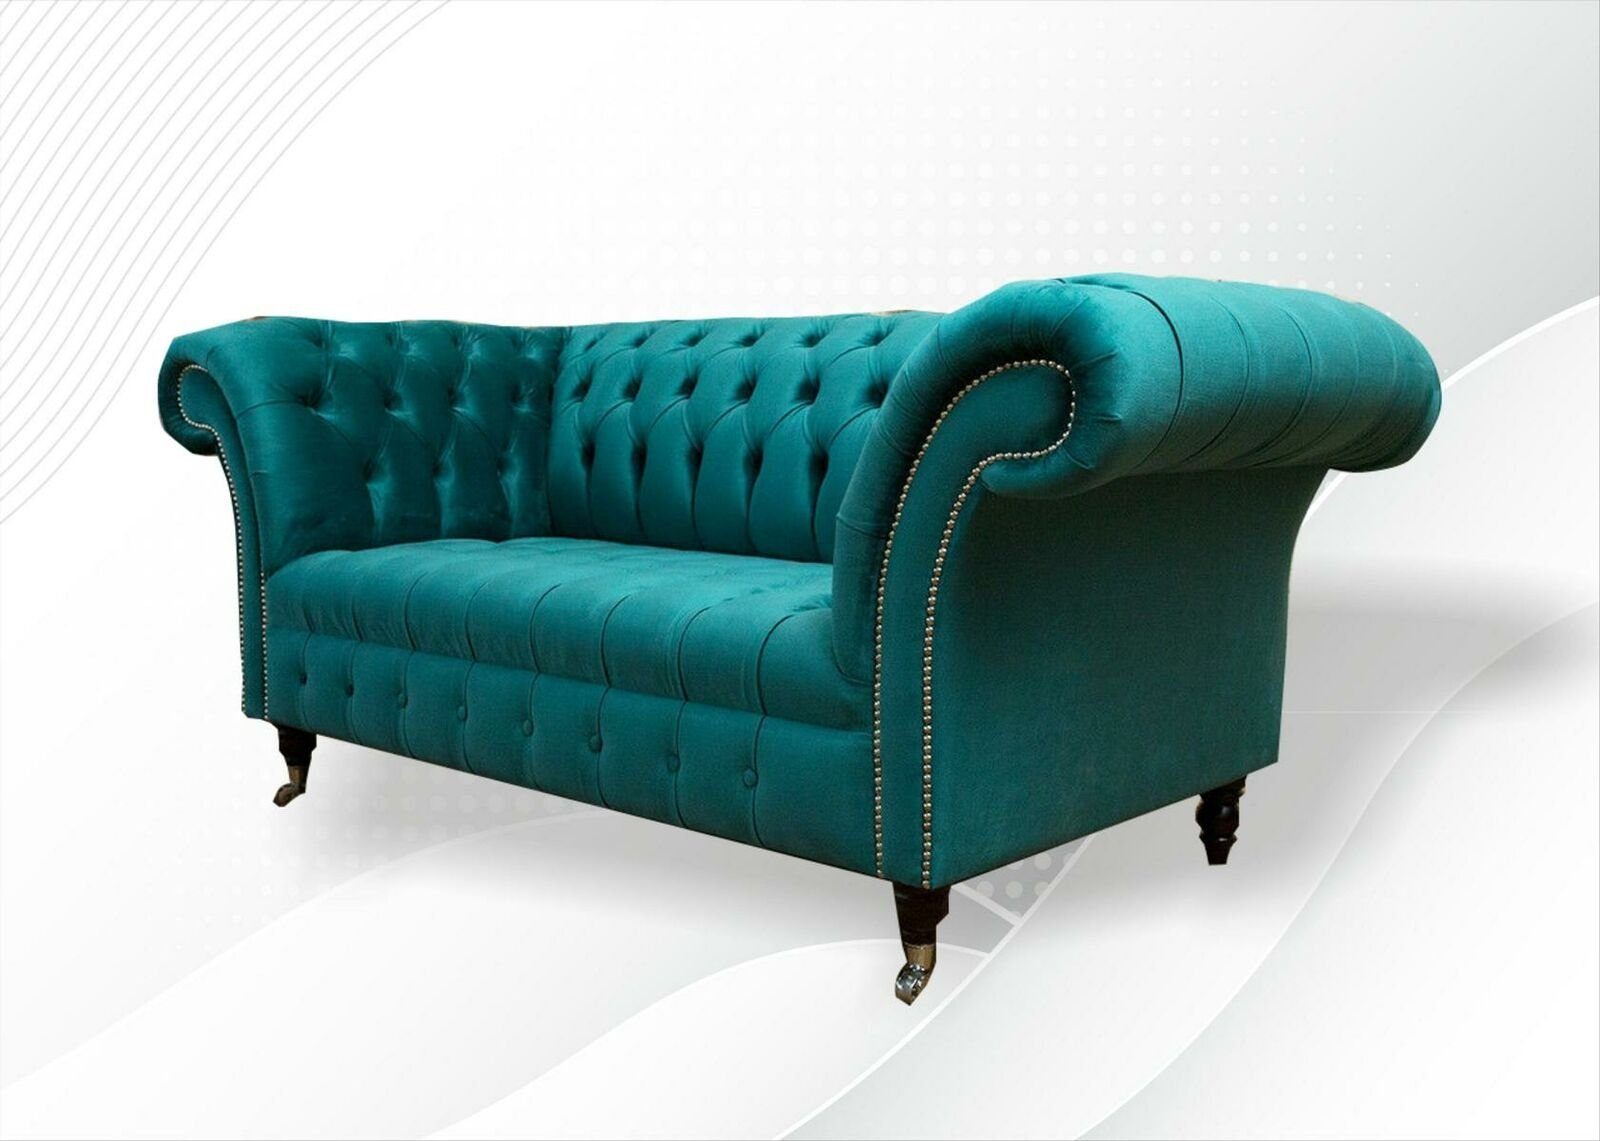 2 Sitzer JVmoebel Couch Sofas Polster Sofa Lounge Chesterfield-Sofa, Design Chesterfield Luxus